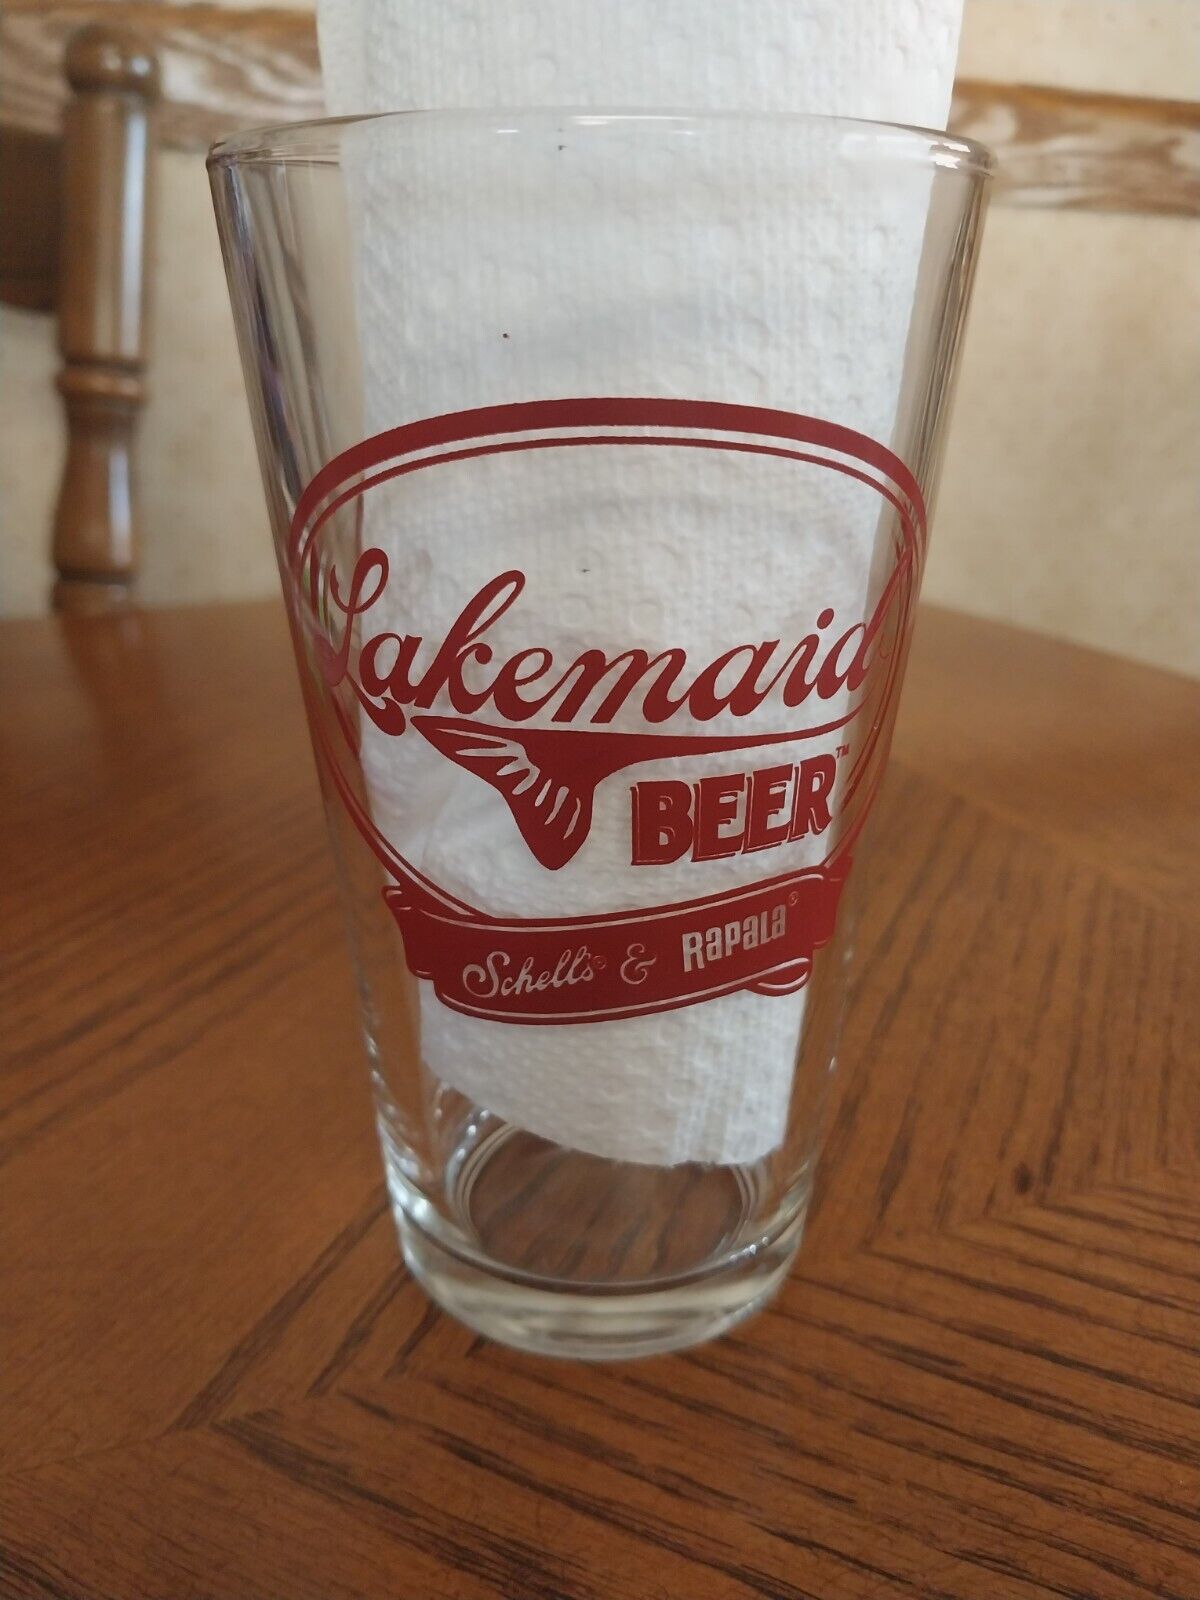 RARE Lakemaid BEER Shell\'s & RAPALA Clear Glass Red Lettering Pint Brewery Glass